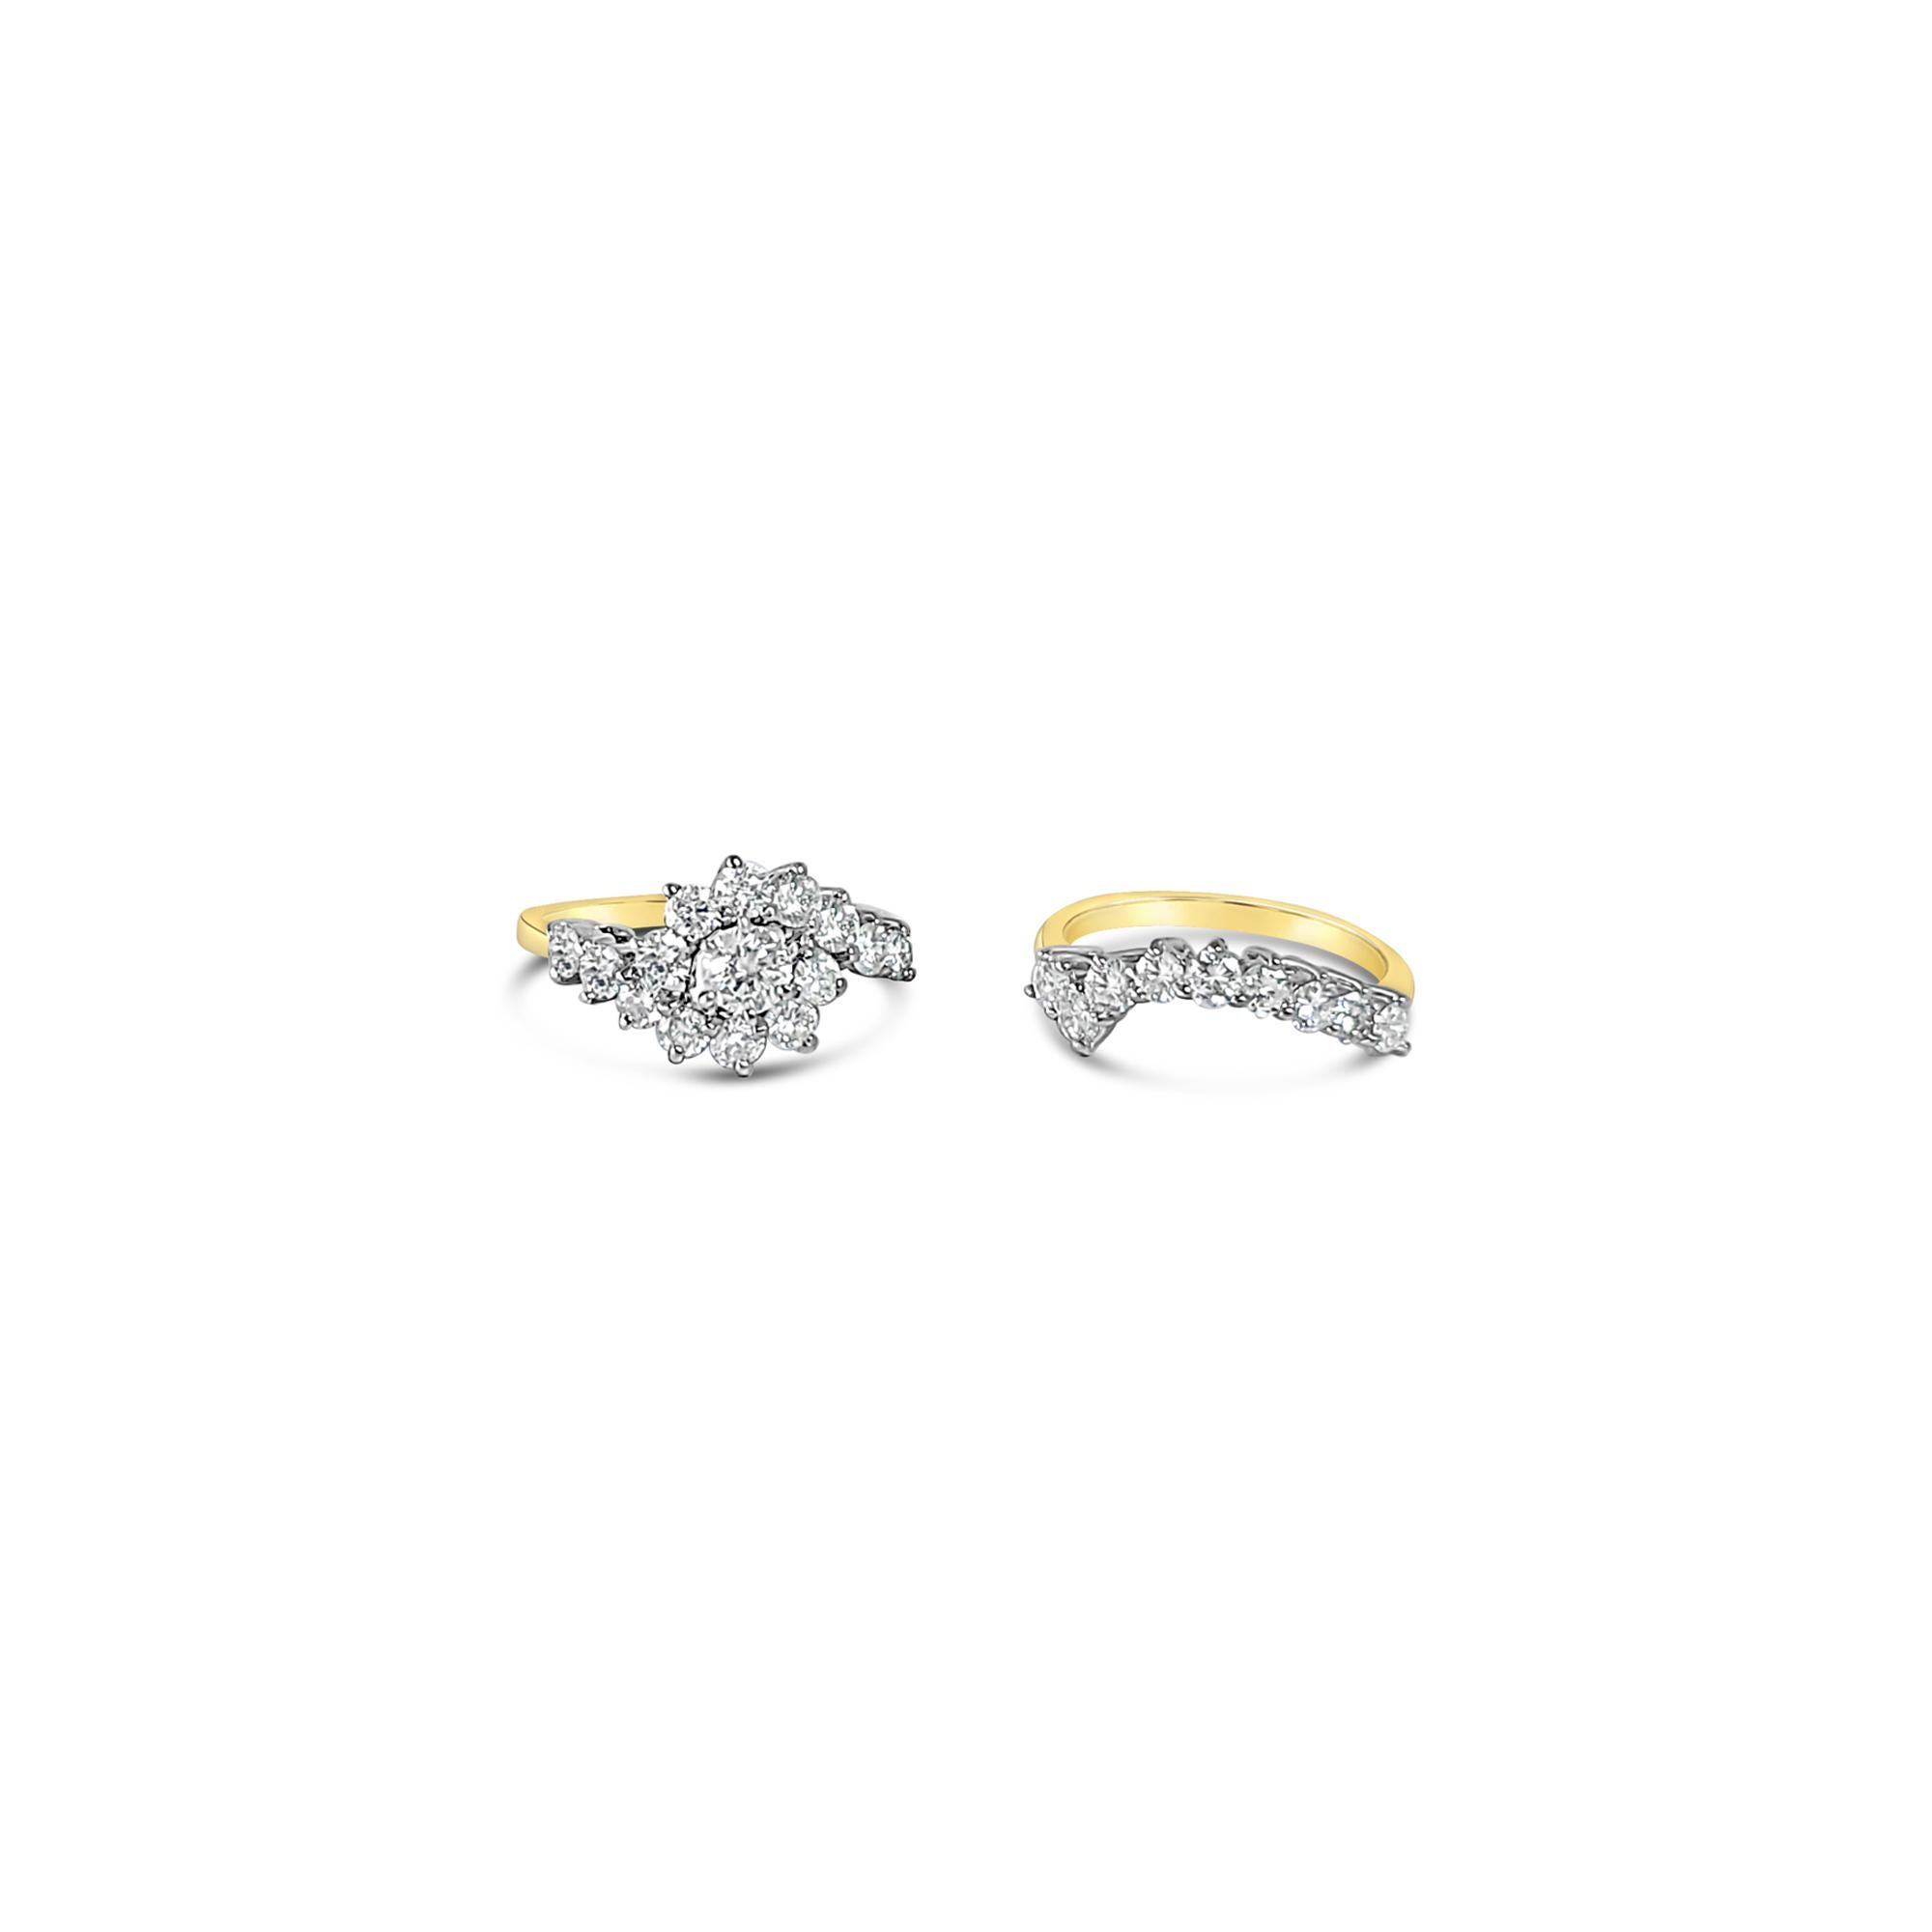 ♥ Ring Summary  ♥

Main Stone: Diamond
Approx. Carat Weight: 2.00cttw
Diamond Clarity: SI1/SI2
Diamond Color: G/H
Band Material: 14k Two-Toned Gold
Stone Cut: Round 
Set: 2 Rings